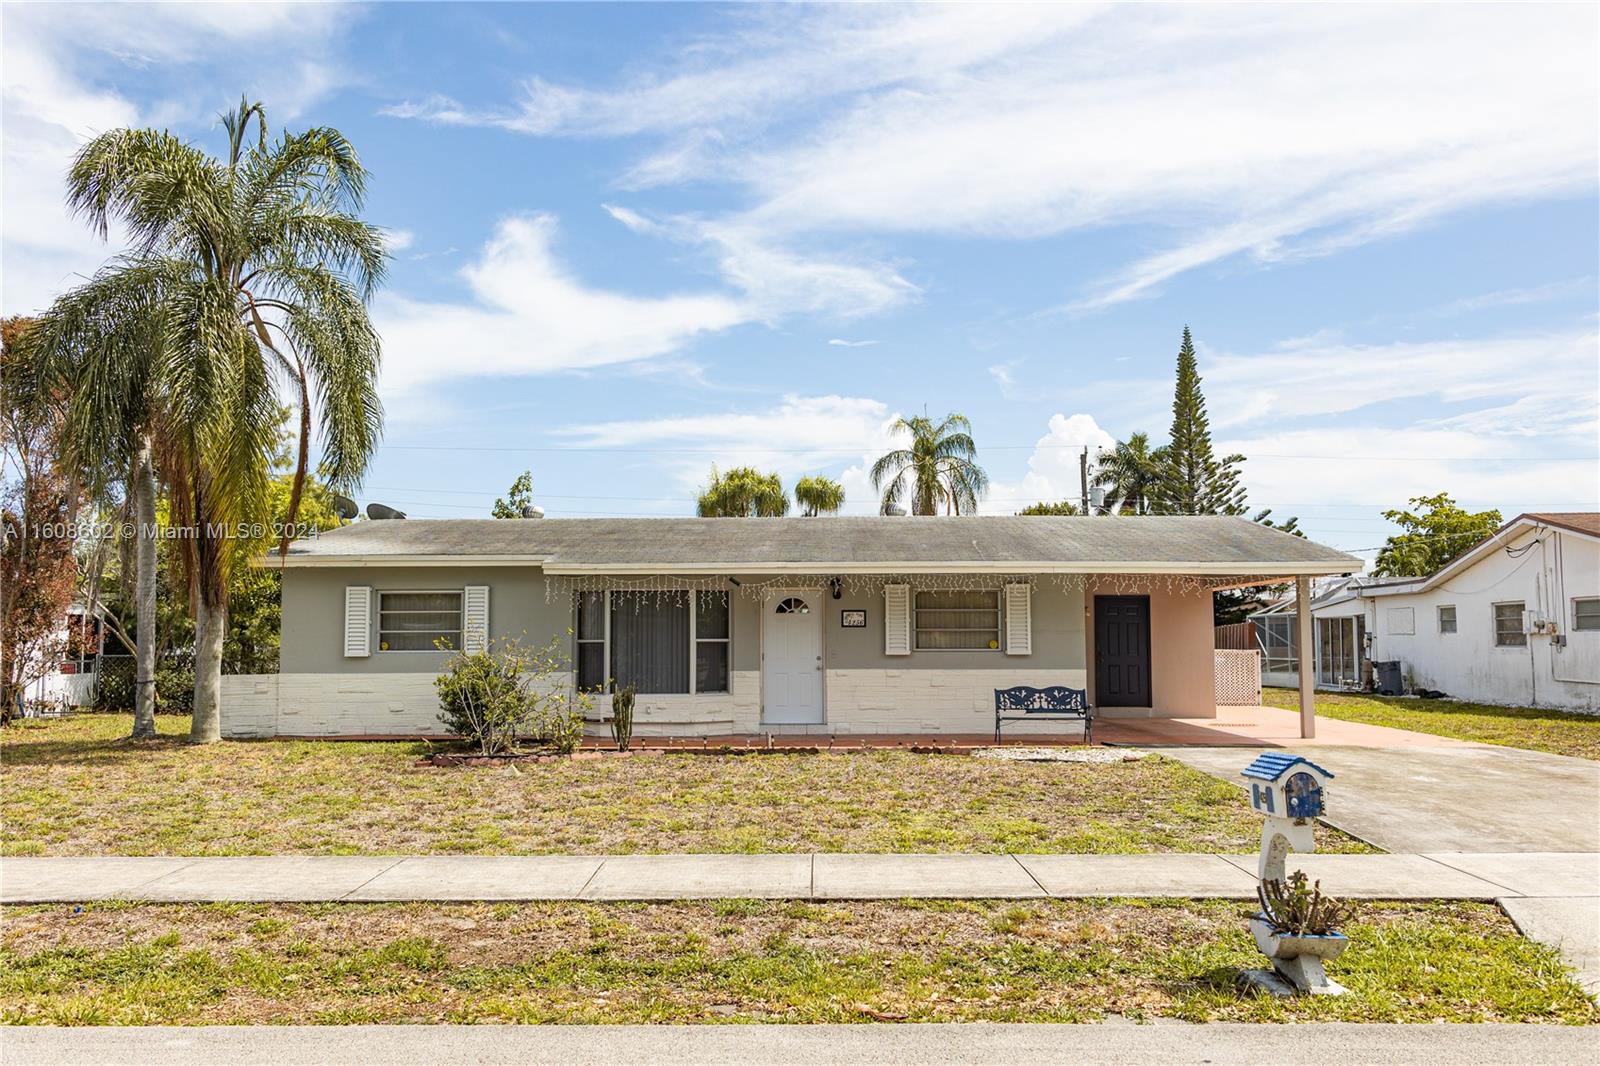 4256 Sw 20th St St, Fort Lauderdale, Broward County, Florida - 4 Bedrooms  
2 Bathrooms - 